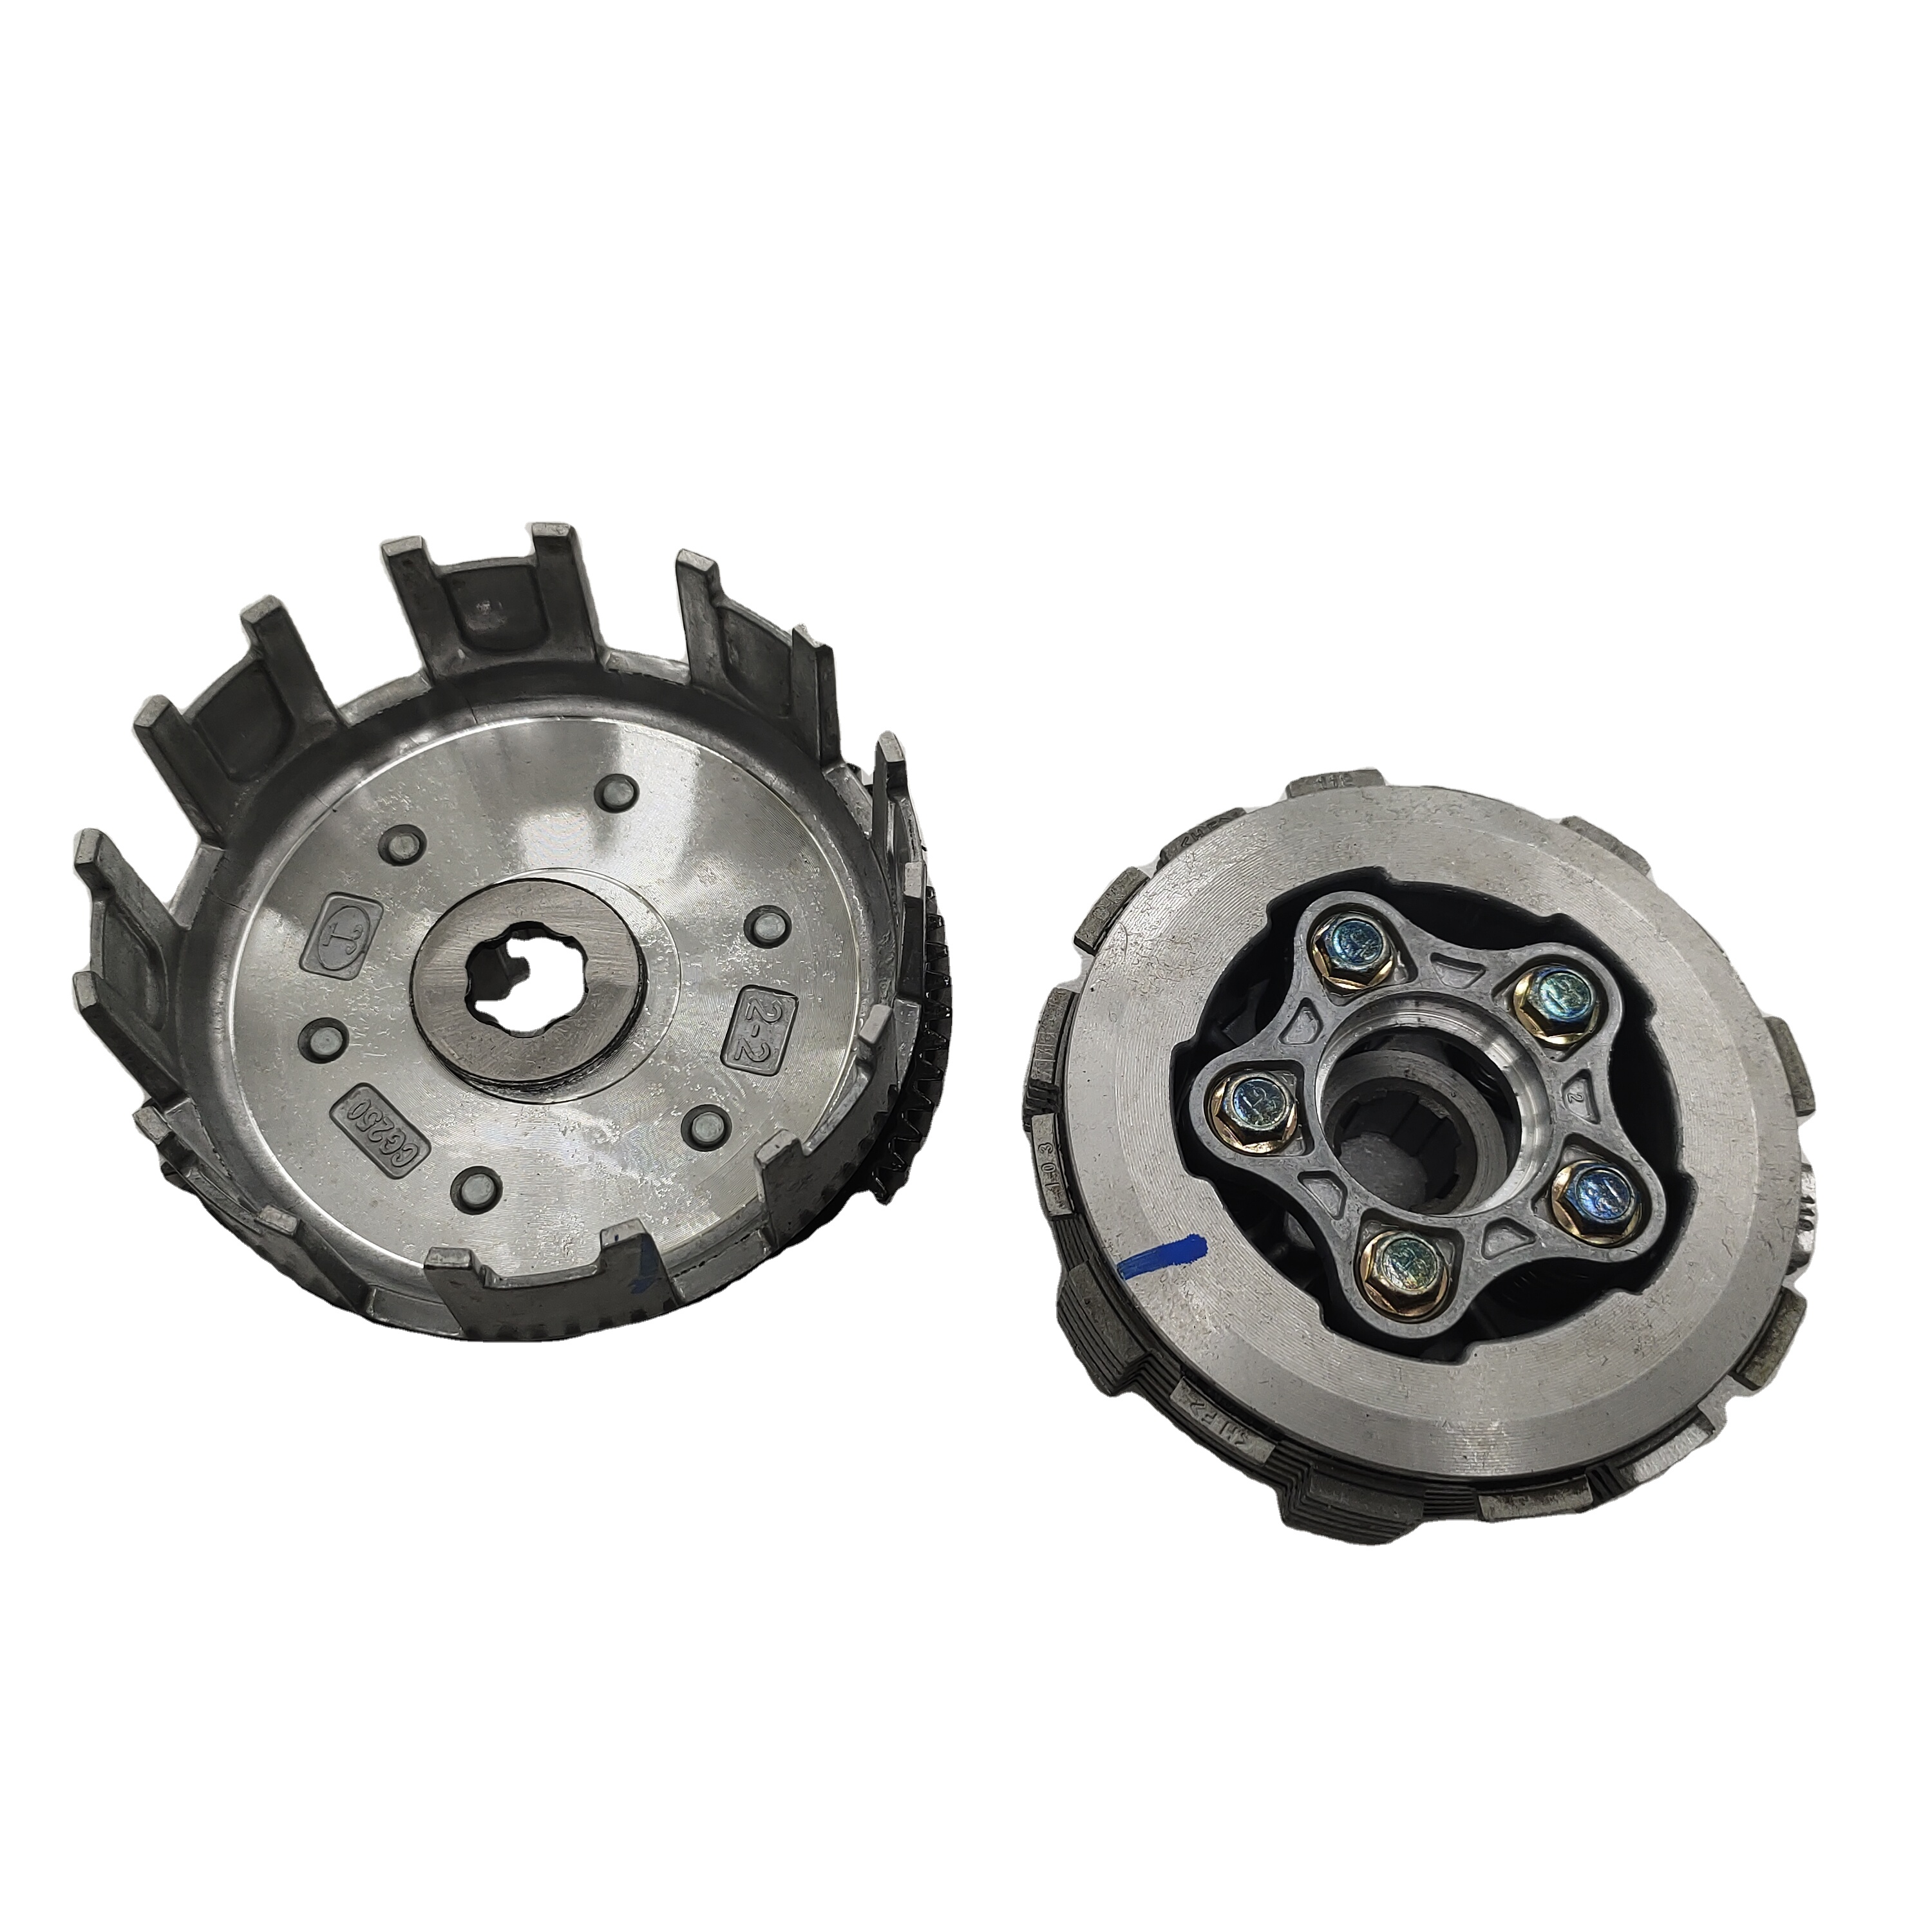 DAYANG brand China FACTORY Direct Hot Sale Strength Motorcycle clutch plate cheap price Origin Type Place Payment